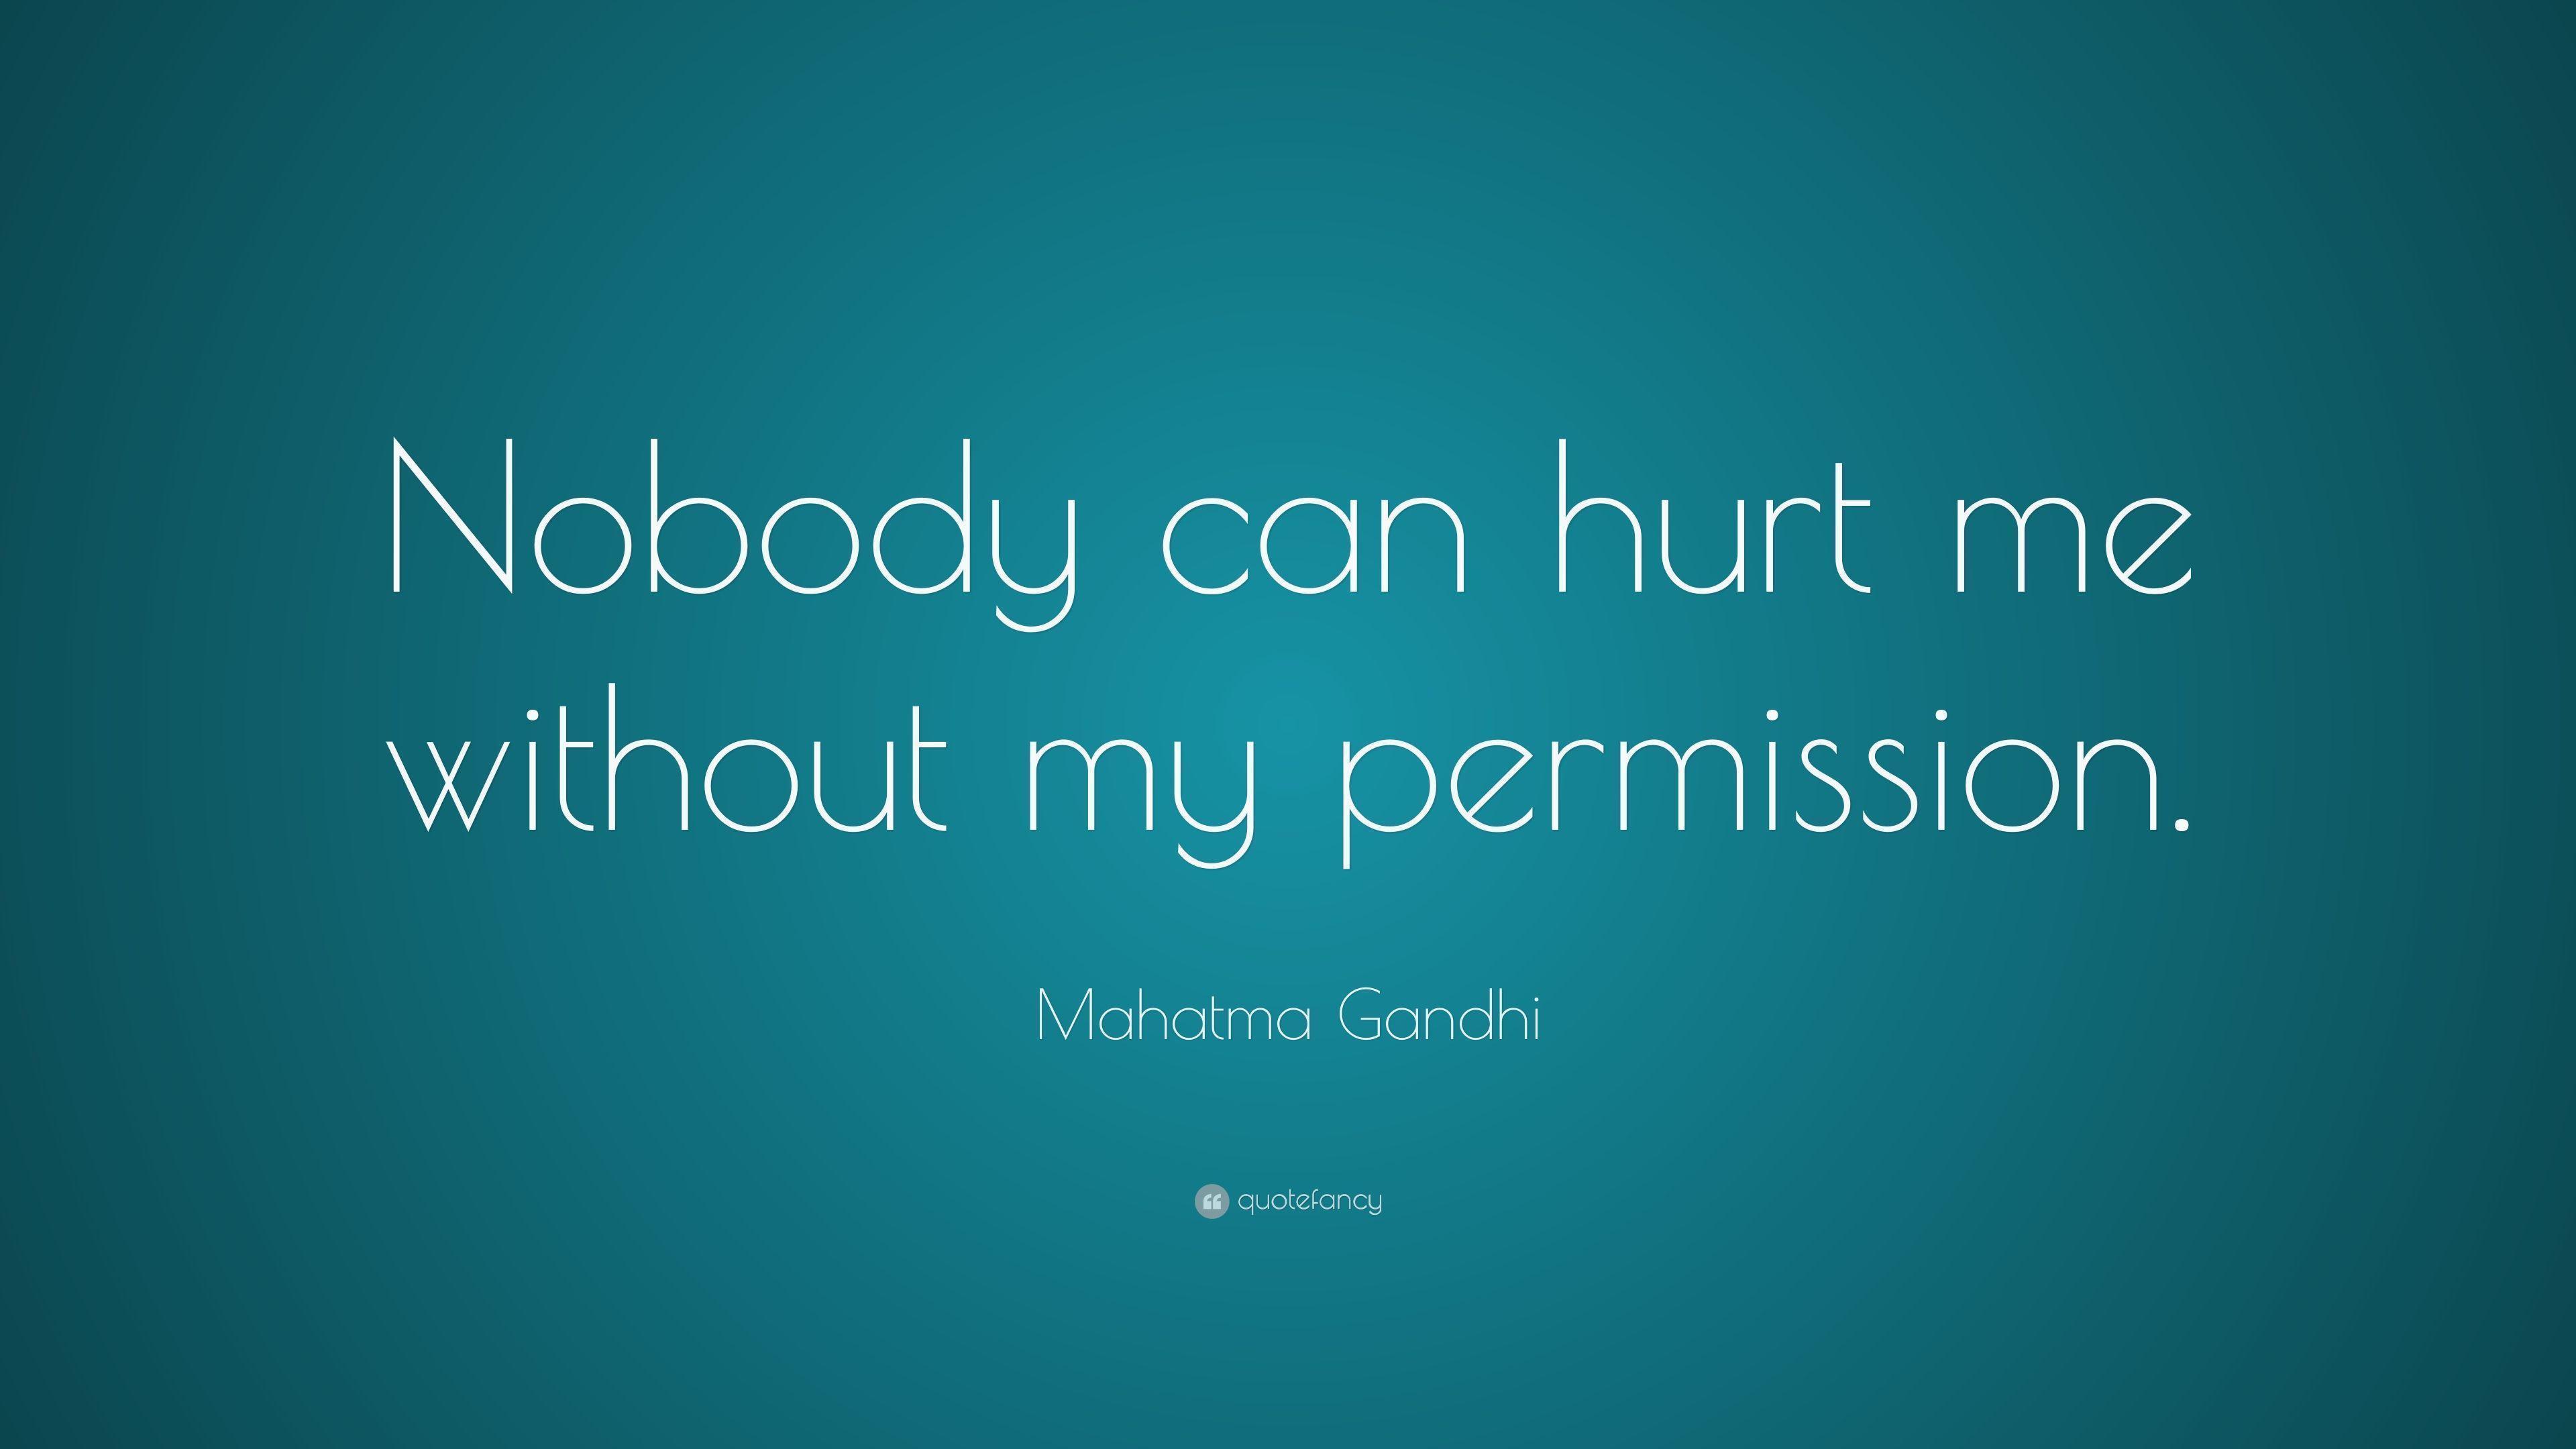 Mahatma Gandhi Quote: “Nobody can hurt me without my permission